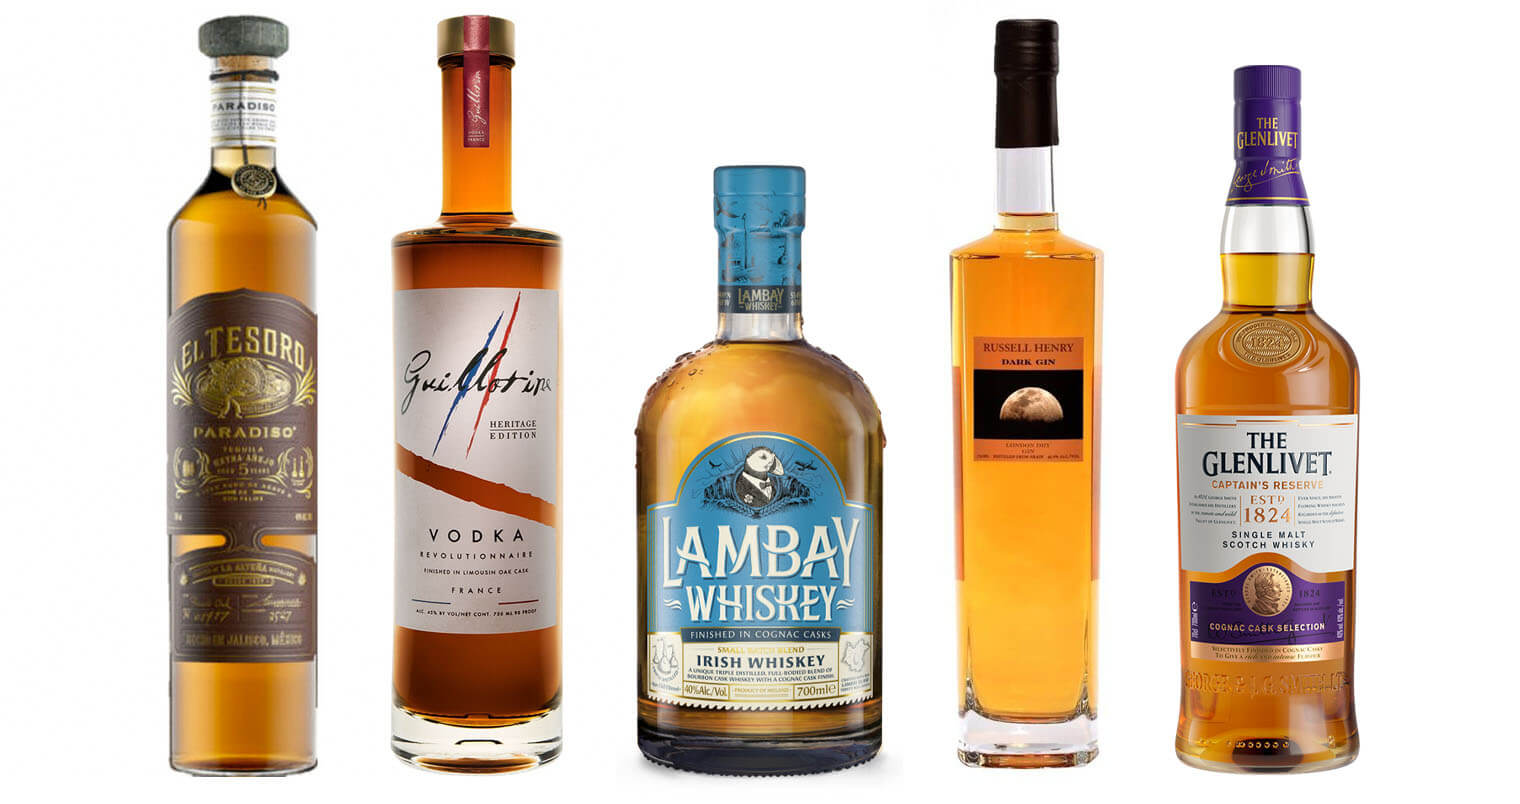 5 Cognac-Finished Spirits To Sip,featured image